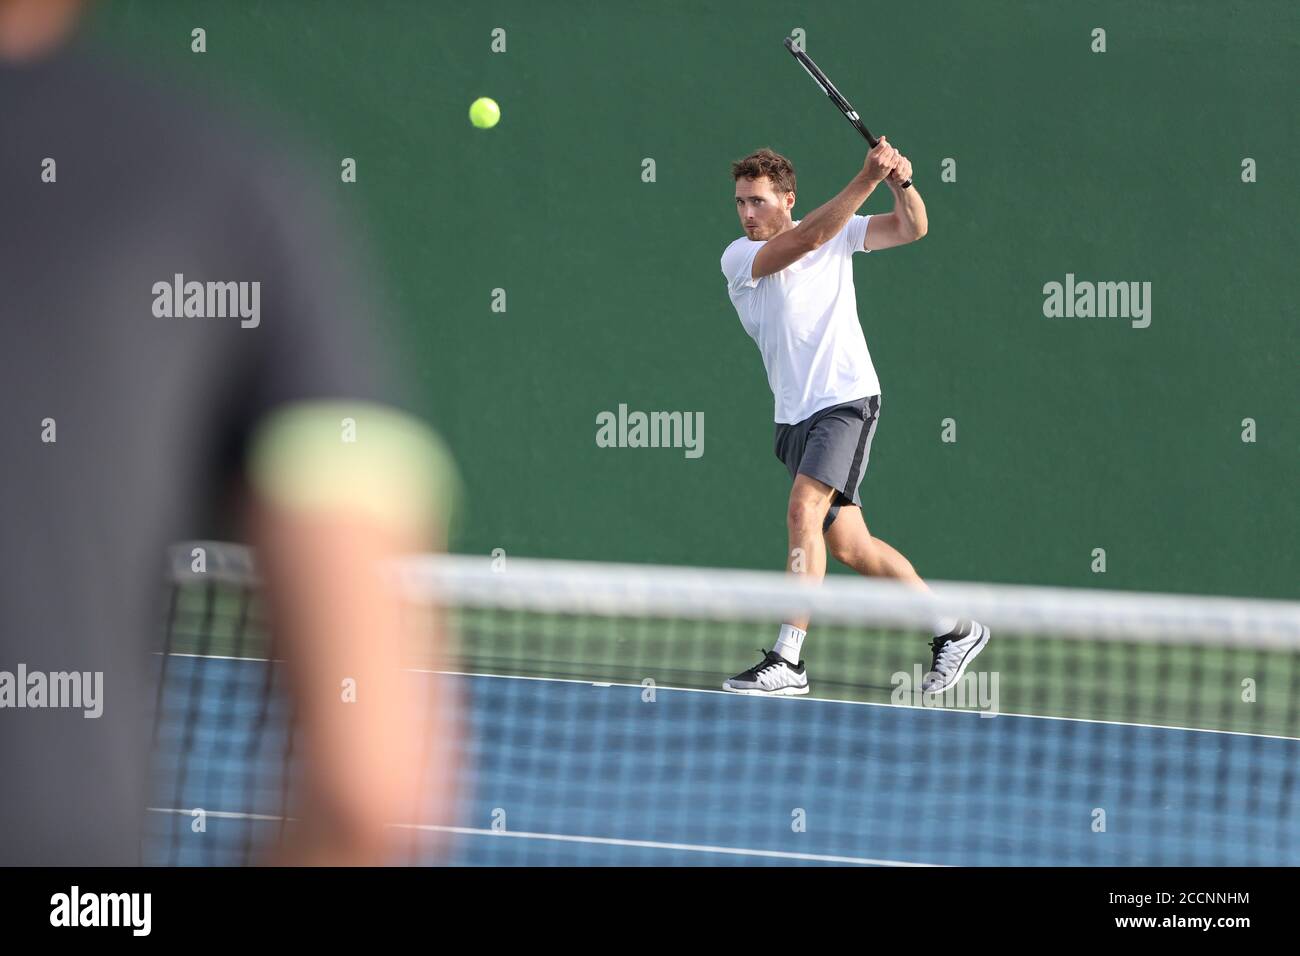 Tennis player man hitting backhand returning ball with racket on green background. Sports men playing together on outdoor court Stock Photo